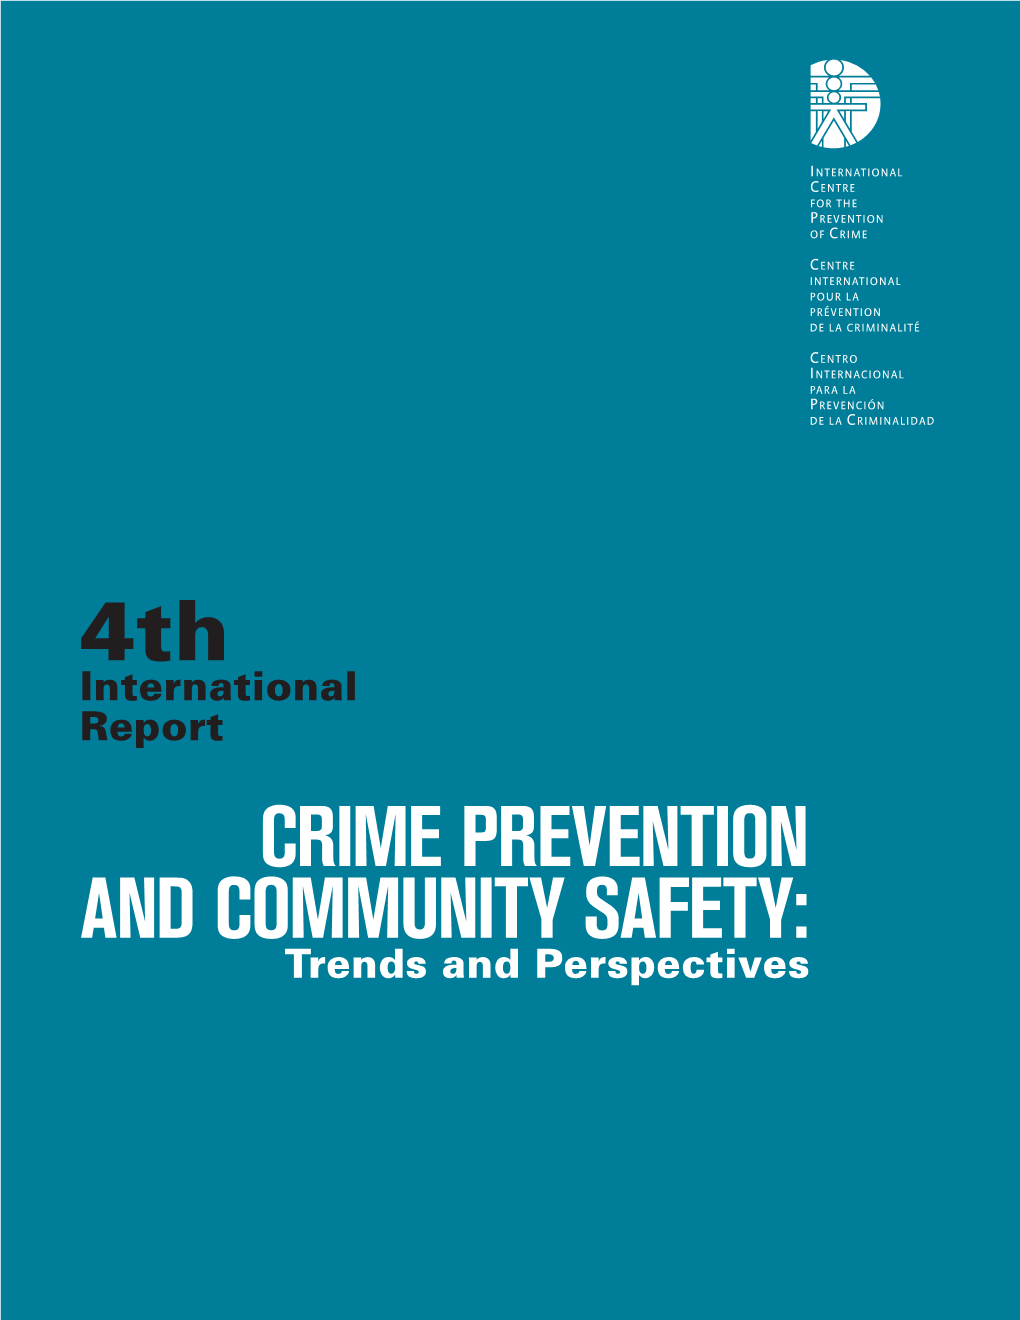 Crime Prevention and Community Safety: Trends and Perspectives